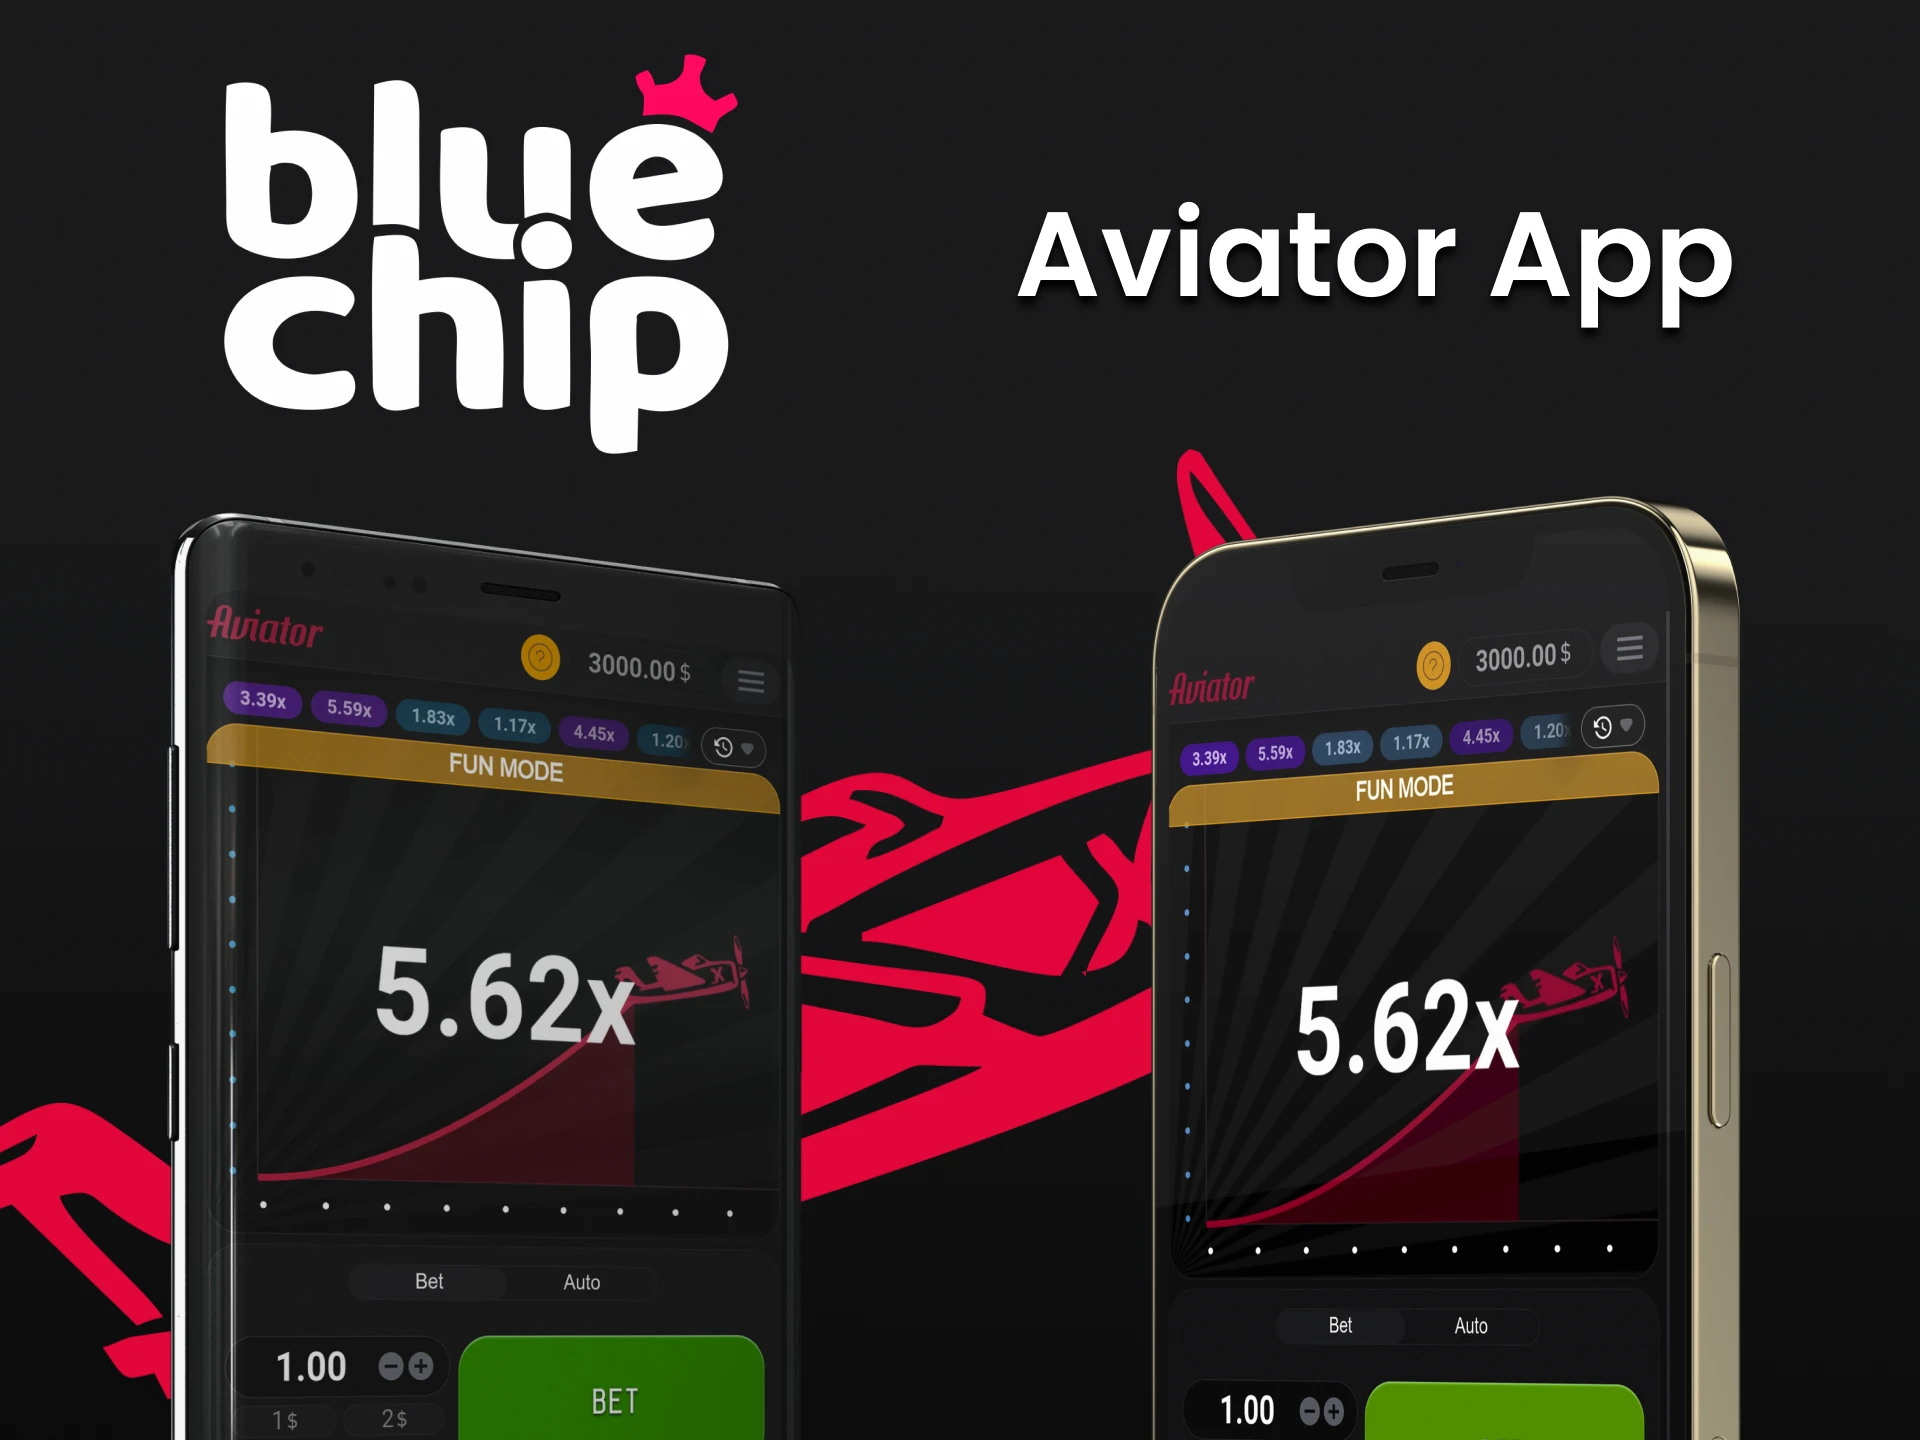 You can play Aviator on BlueChip using your smartphone.